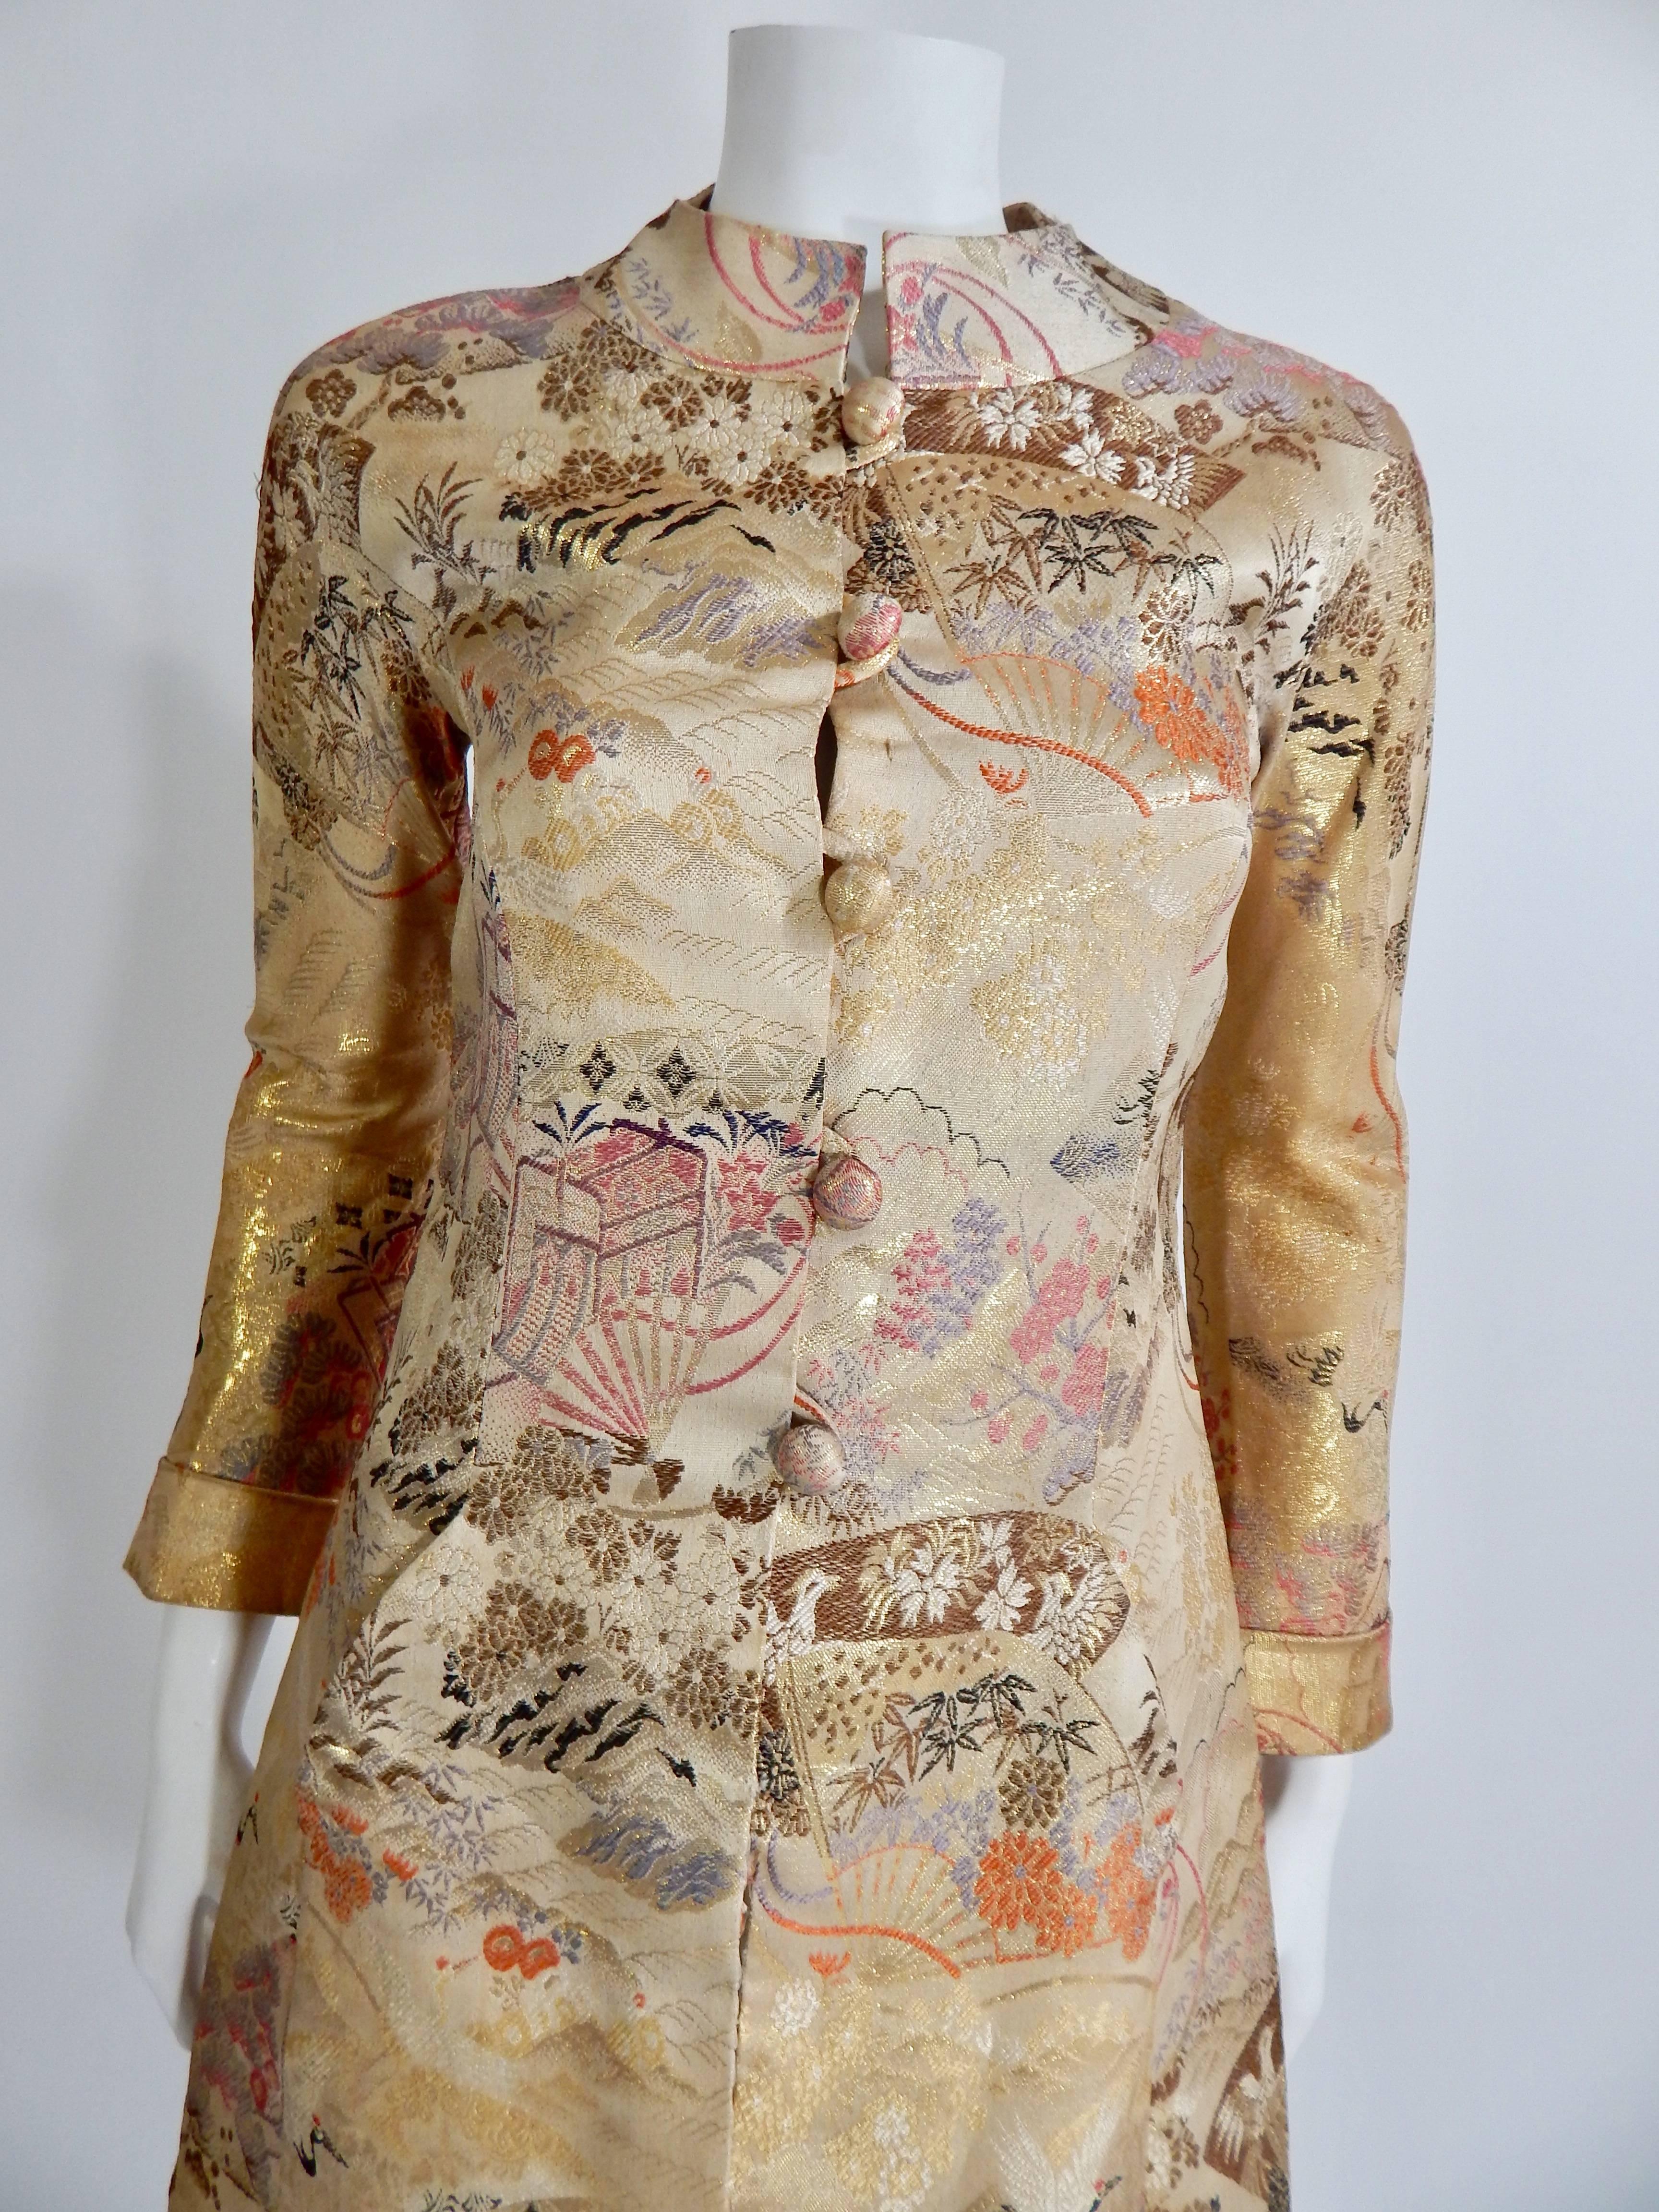 Gorgeous 1960s Henri Bendel Silk Coat. Asian Silk Embroidered Fabric. Lined in Silk. Coat is in overall excellent condition with some light staining to silk lining interior.  Vintage tag reads size 8 however Coat is an approximate modern day size 2.